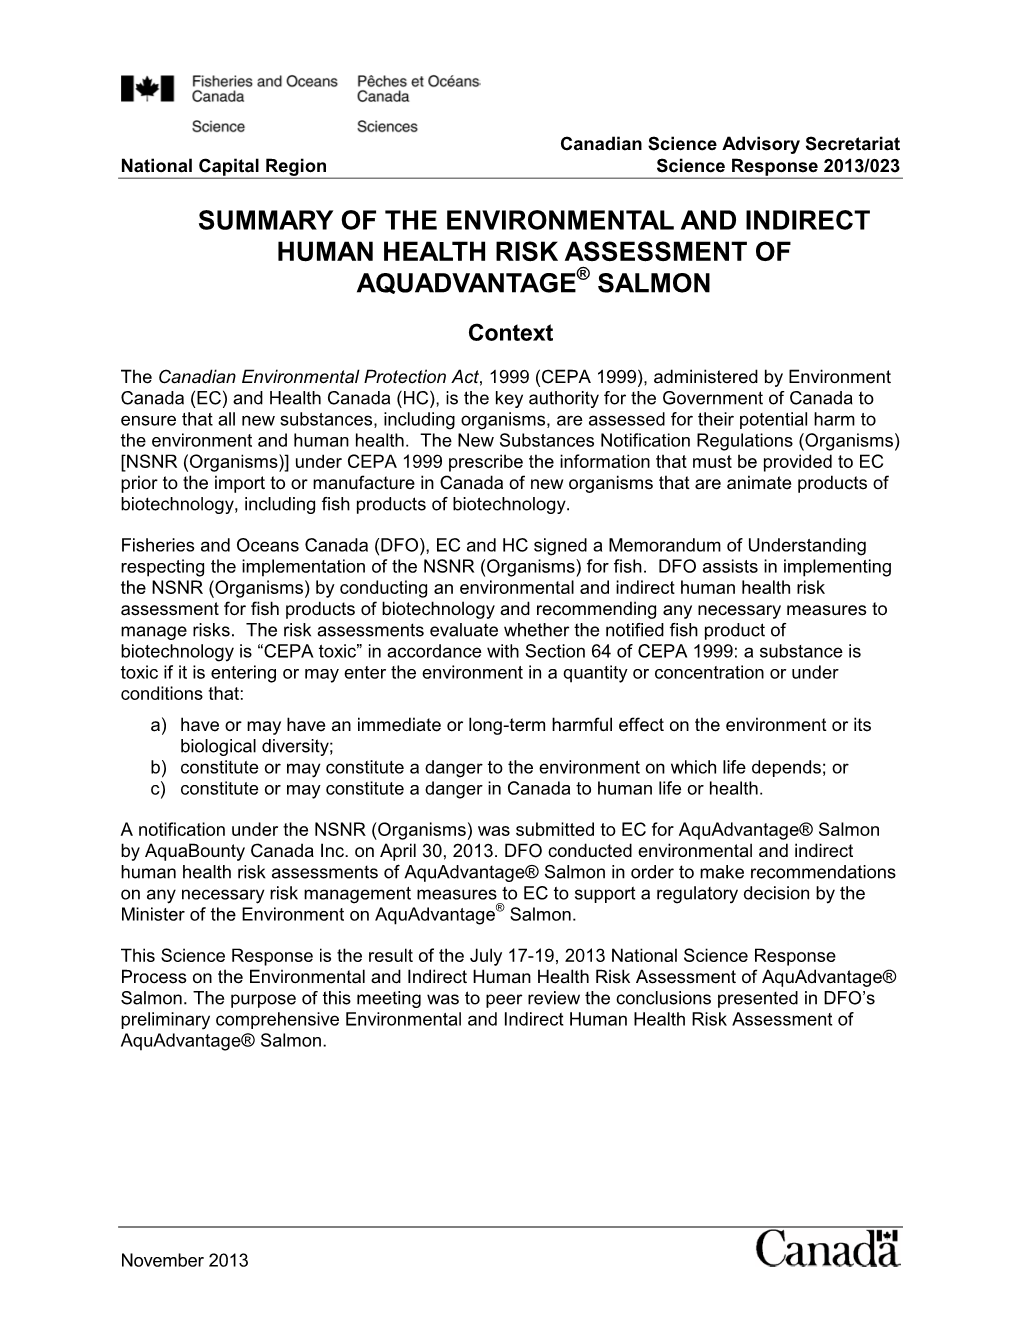 Summary of the Environmental and Indirect Human Health Risk Assessment of Aquadvantage® Salmon